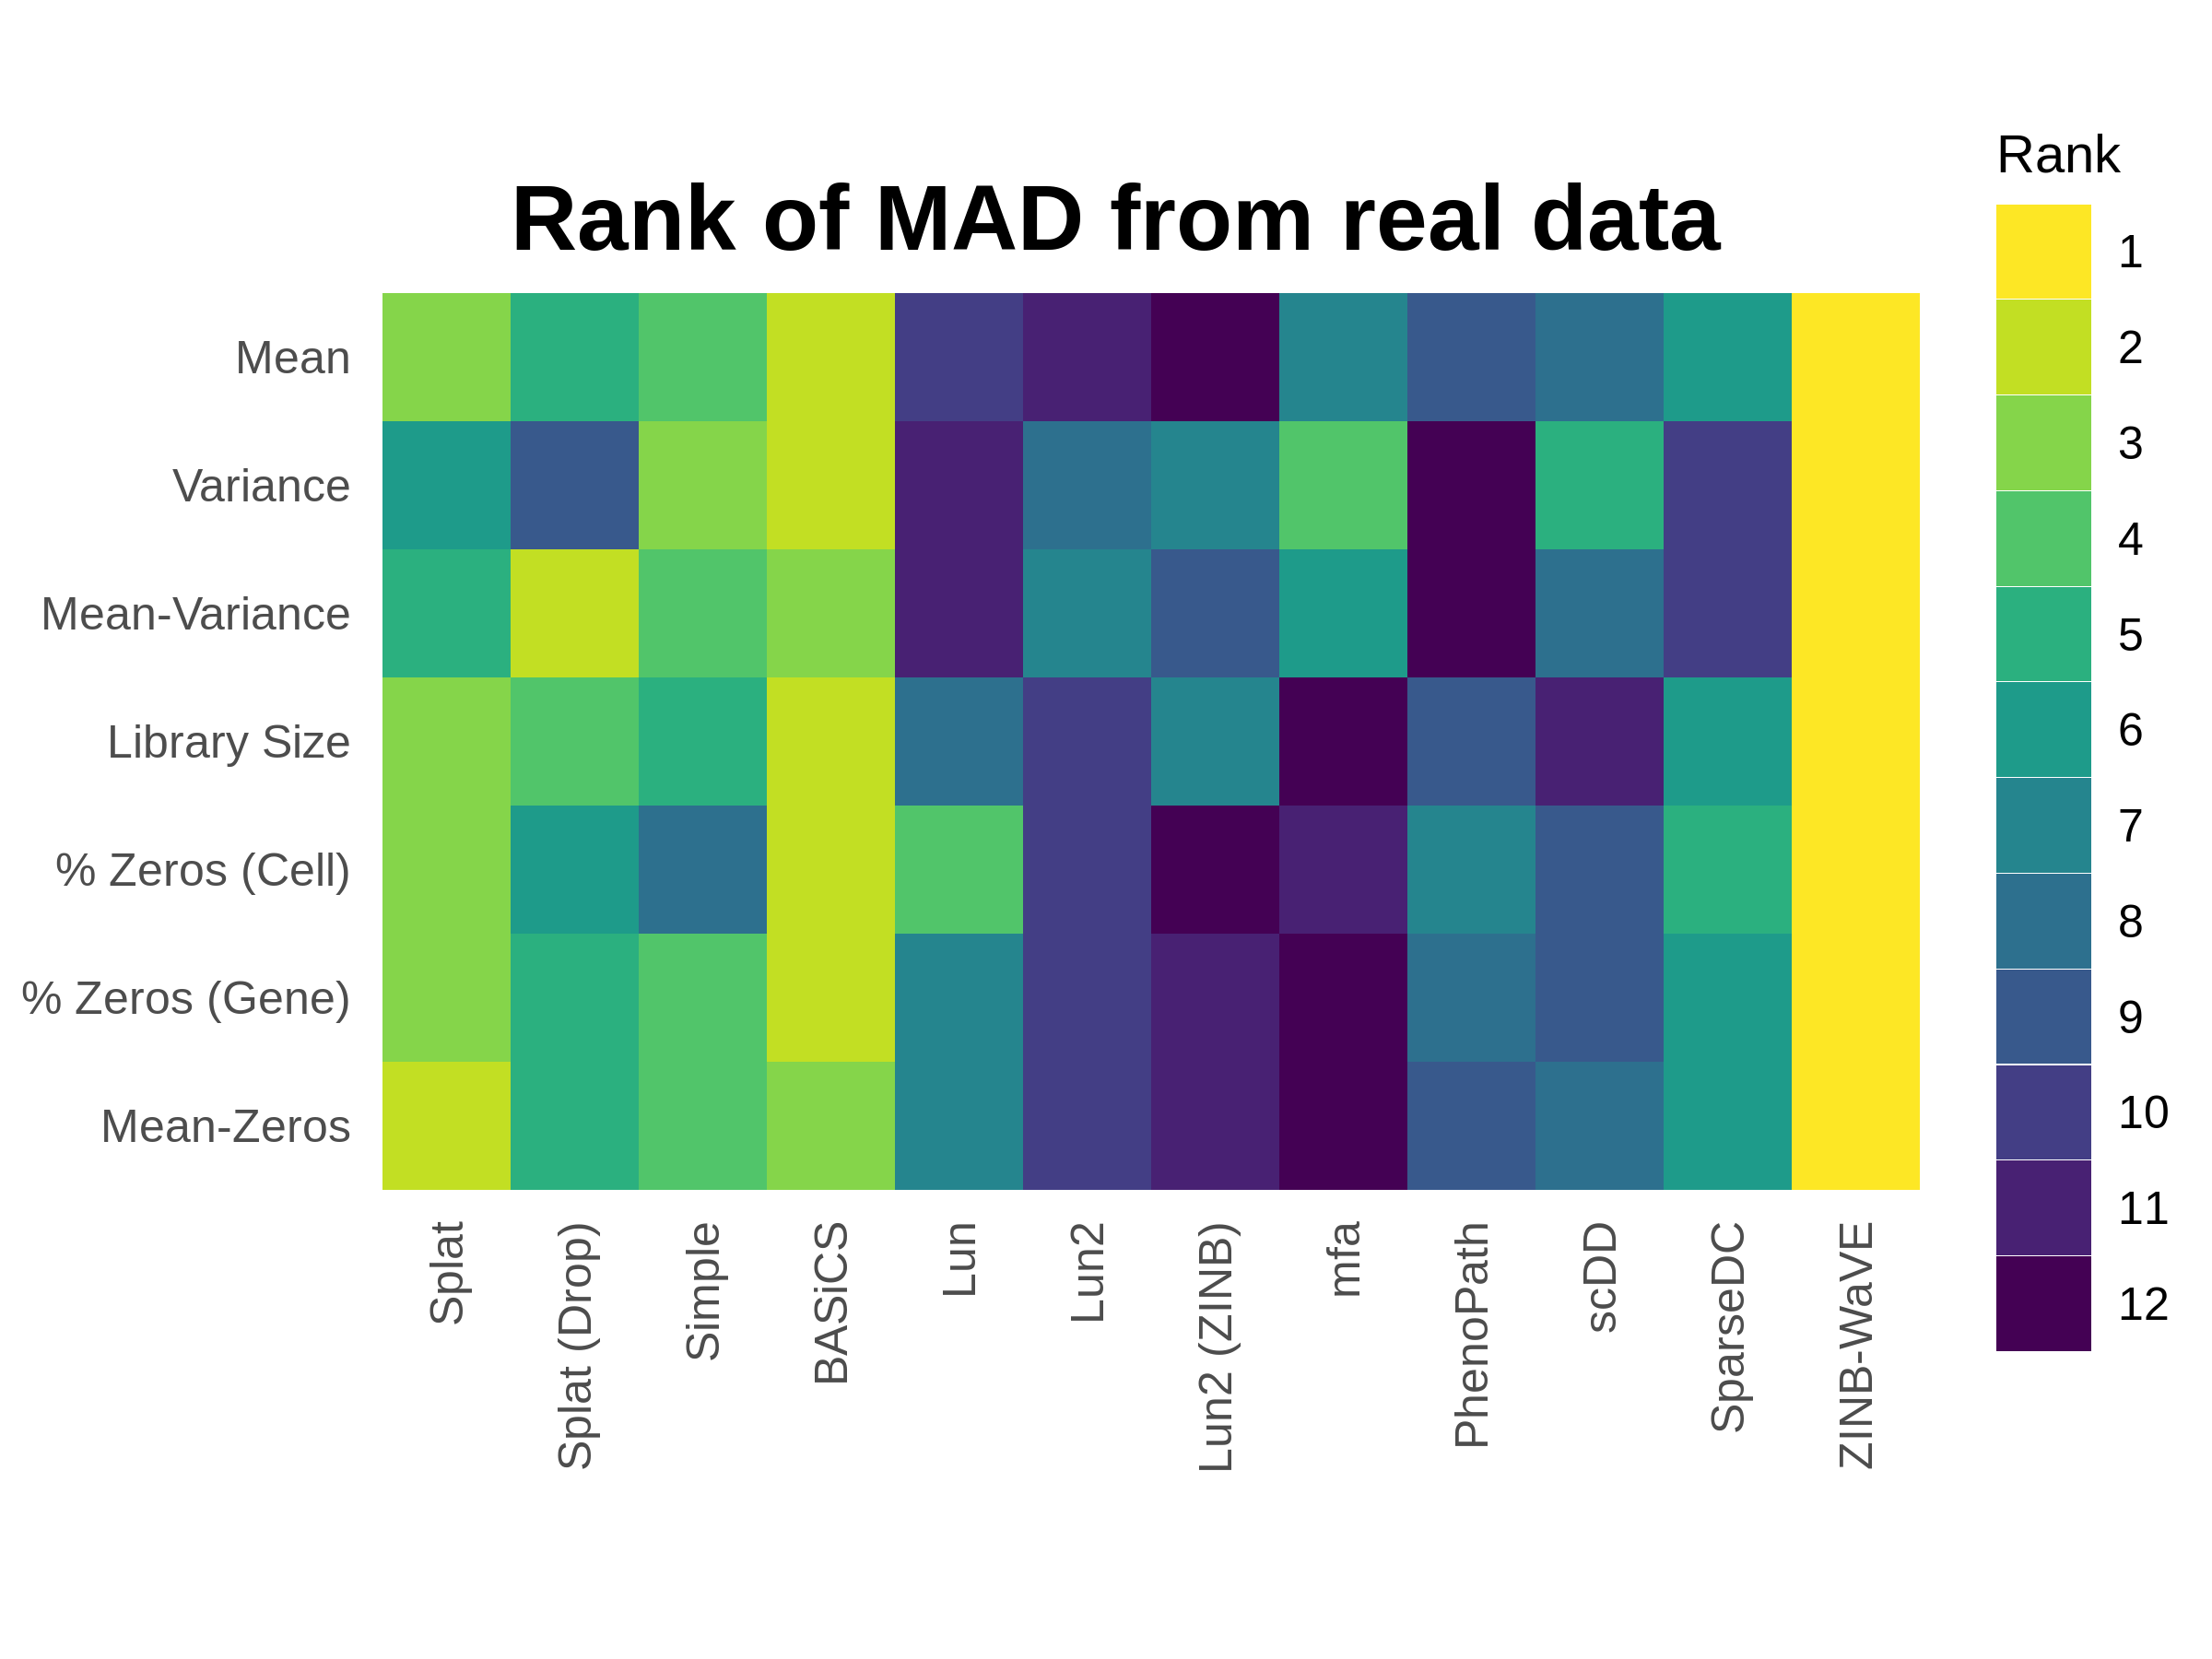 Performance of current Splatter simulations. Synthetic datasets were produced using parameters estimated from 500 random cells from the Tung dataset. Plot shows the rank of median absolute deviation (MAD) from the real dataset on a variety of measures from least similar (blue) to most similar (yellow). The ZINB-WaVE model best reproduces this dataset, followed by the updated BASiCS model. The Splat model also performs well despite having a less sophisticated estimation procedure.